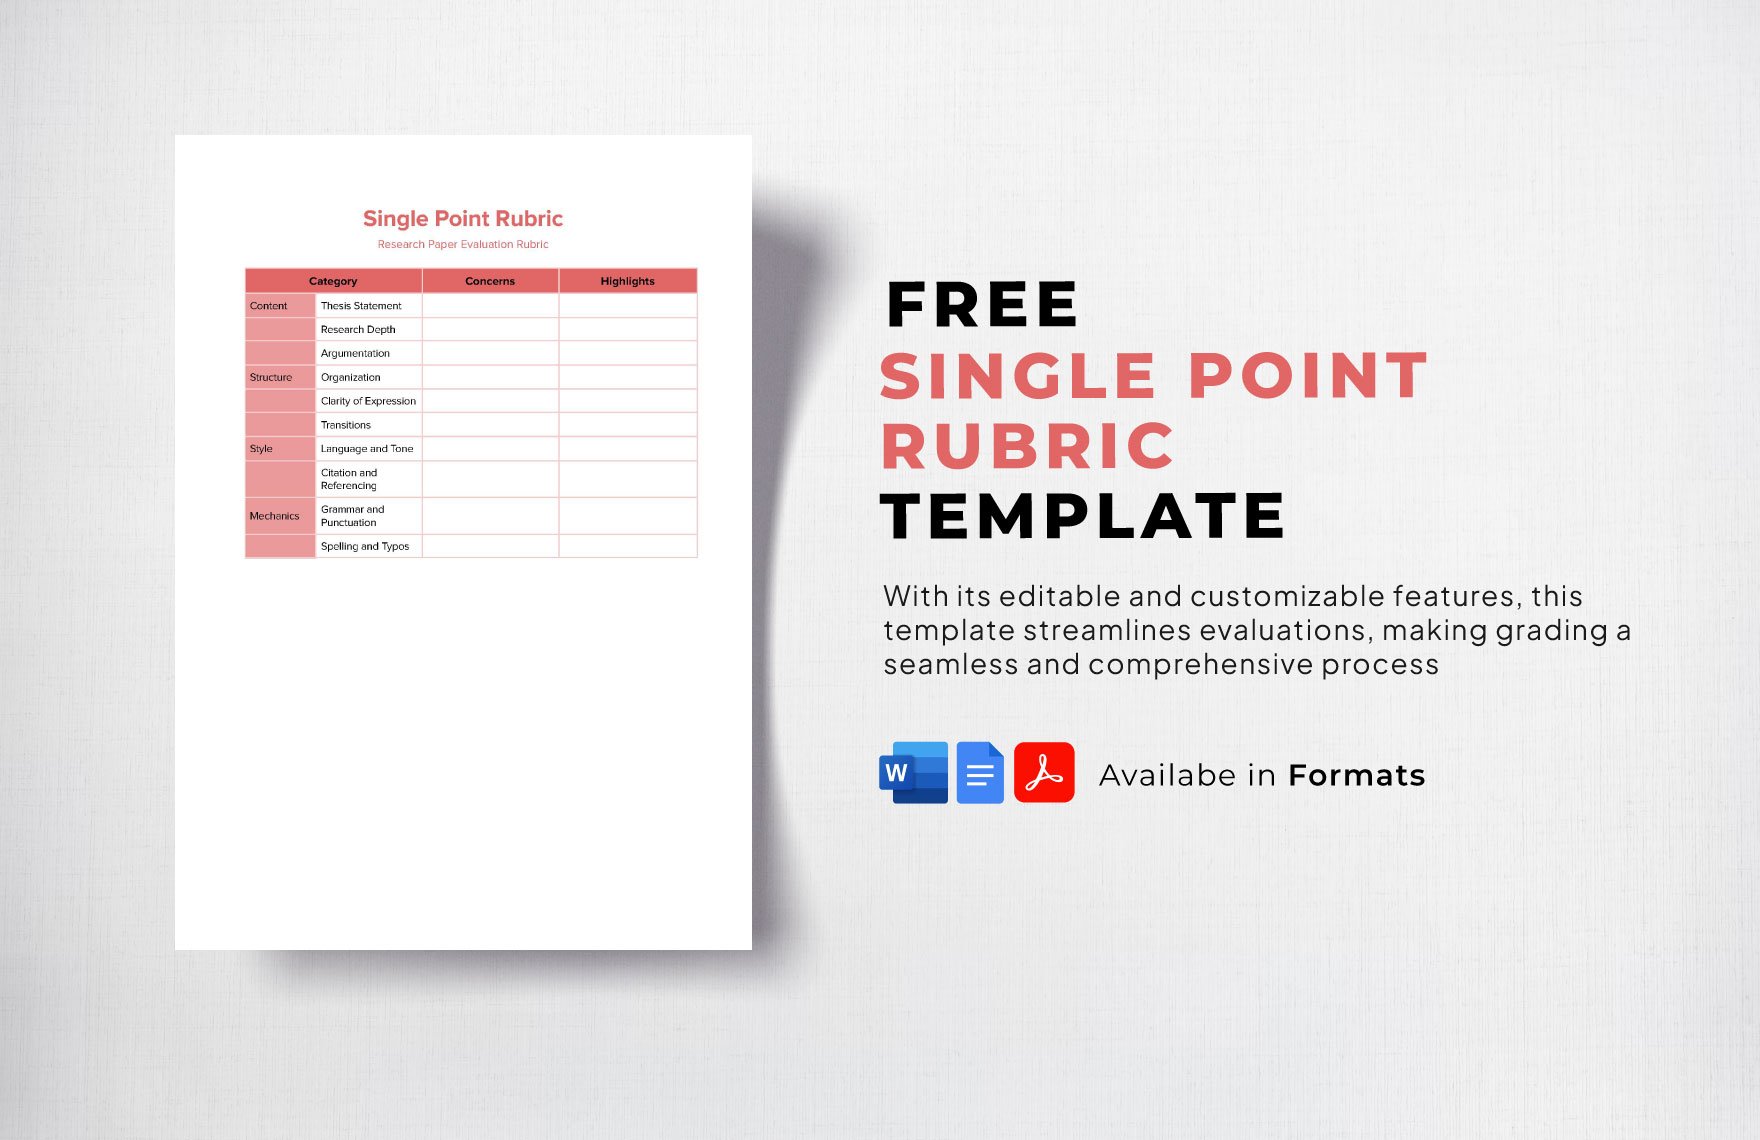 Single Point Rubric Template